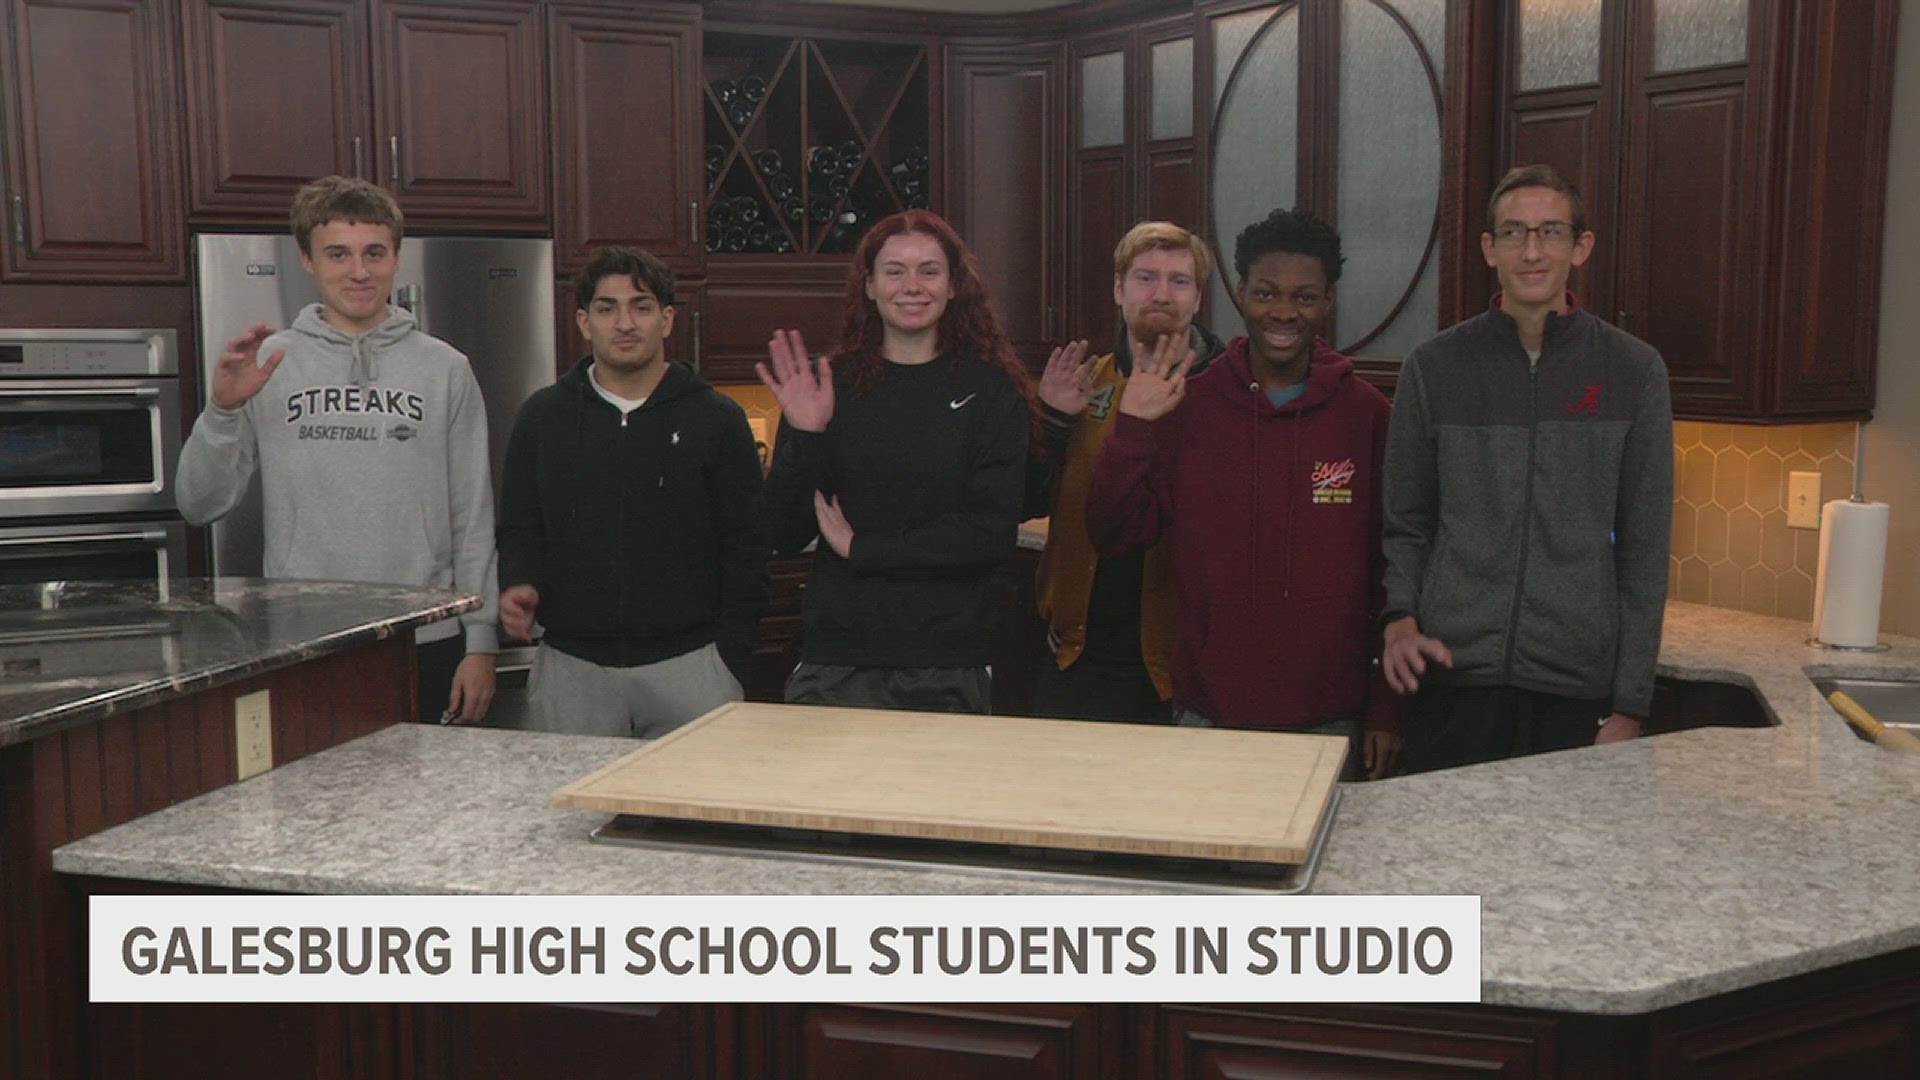 The group of students is part of a 'Media Writing and Broadcasting' class and came to see the behind-the-scenes work at a television station.